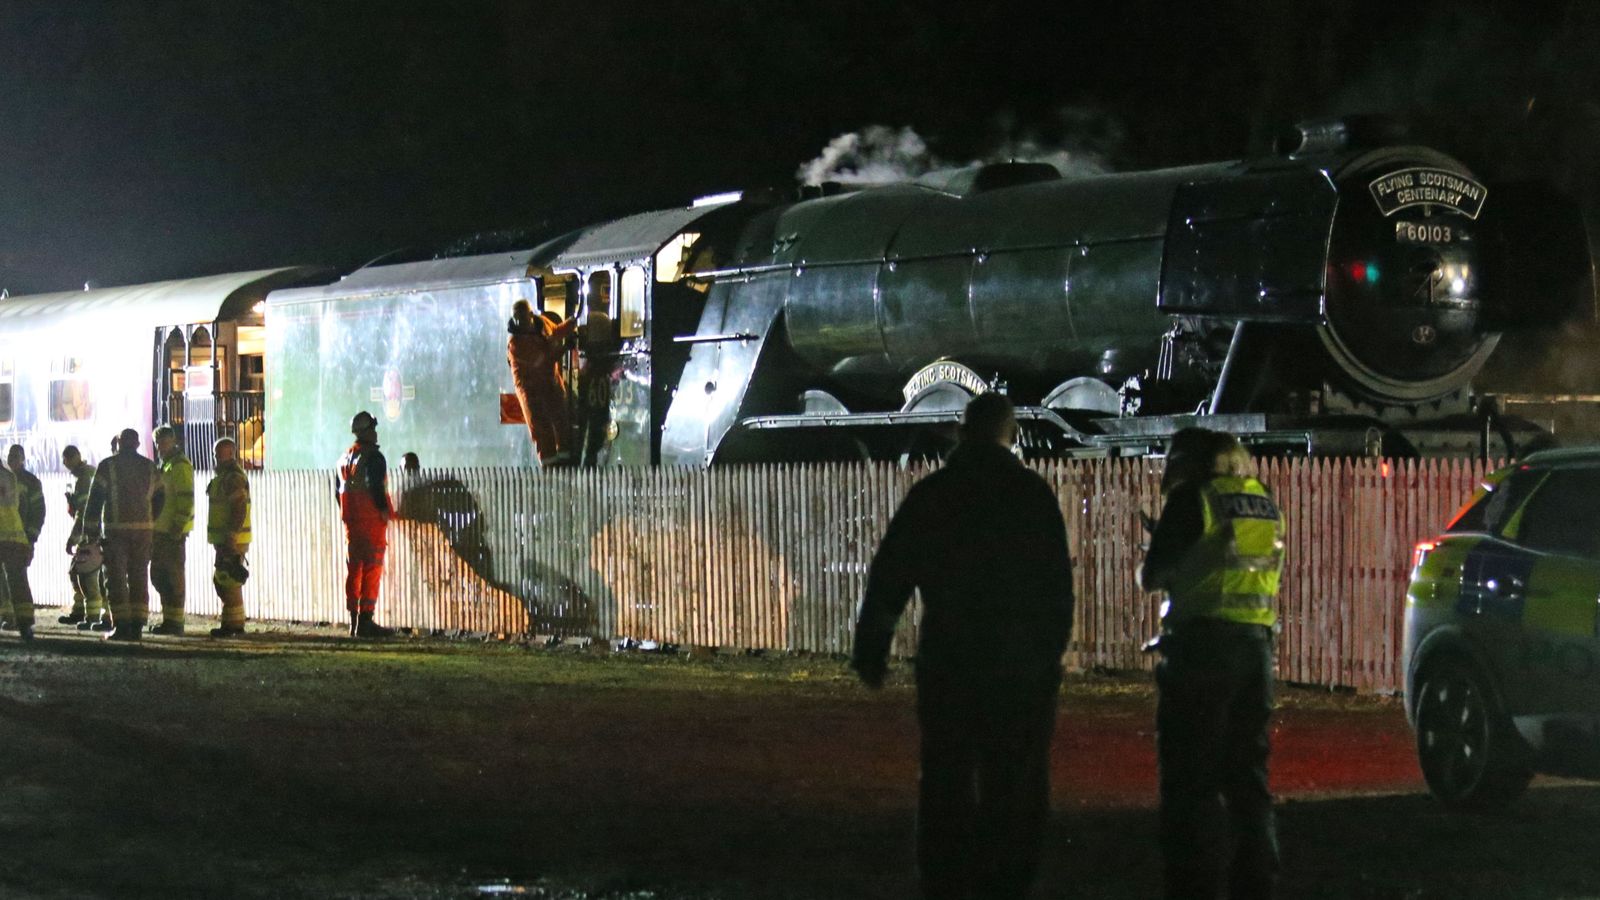 Flying Scotsman crash: Two people taken to hospital after collision in Scotland